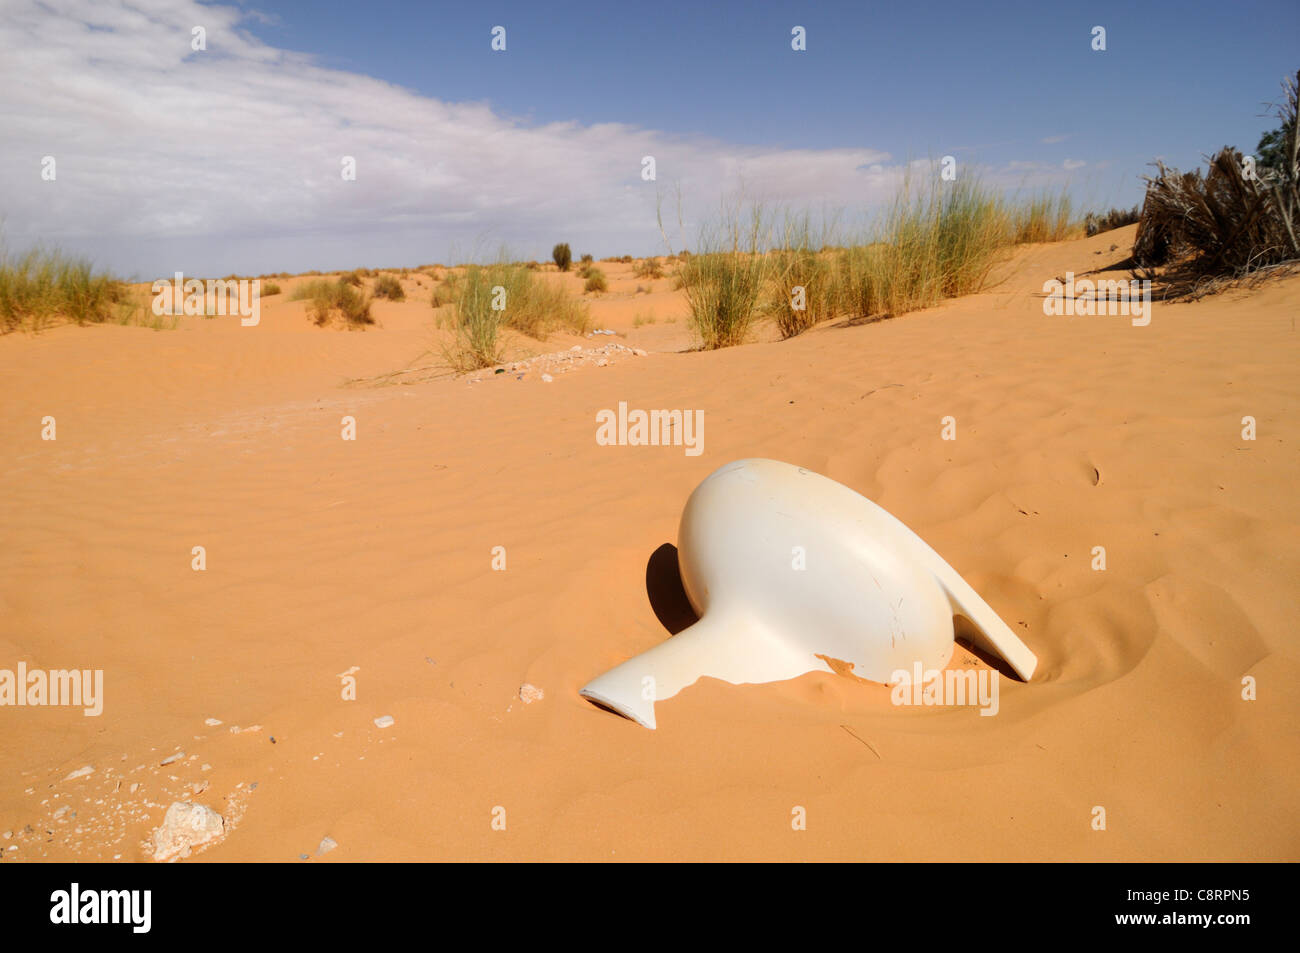 Africa, Tunisia, nr. Douz. Remains of a toilet bowl in the dunes south of Douz. Stock Photo